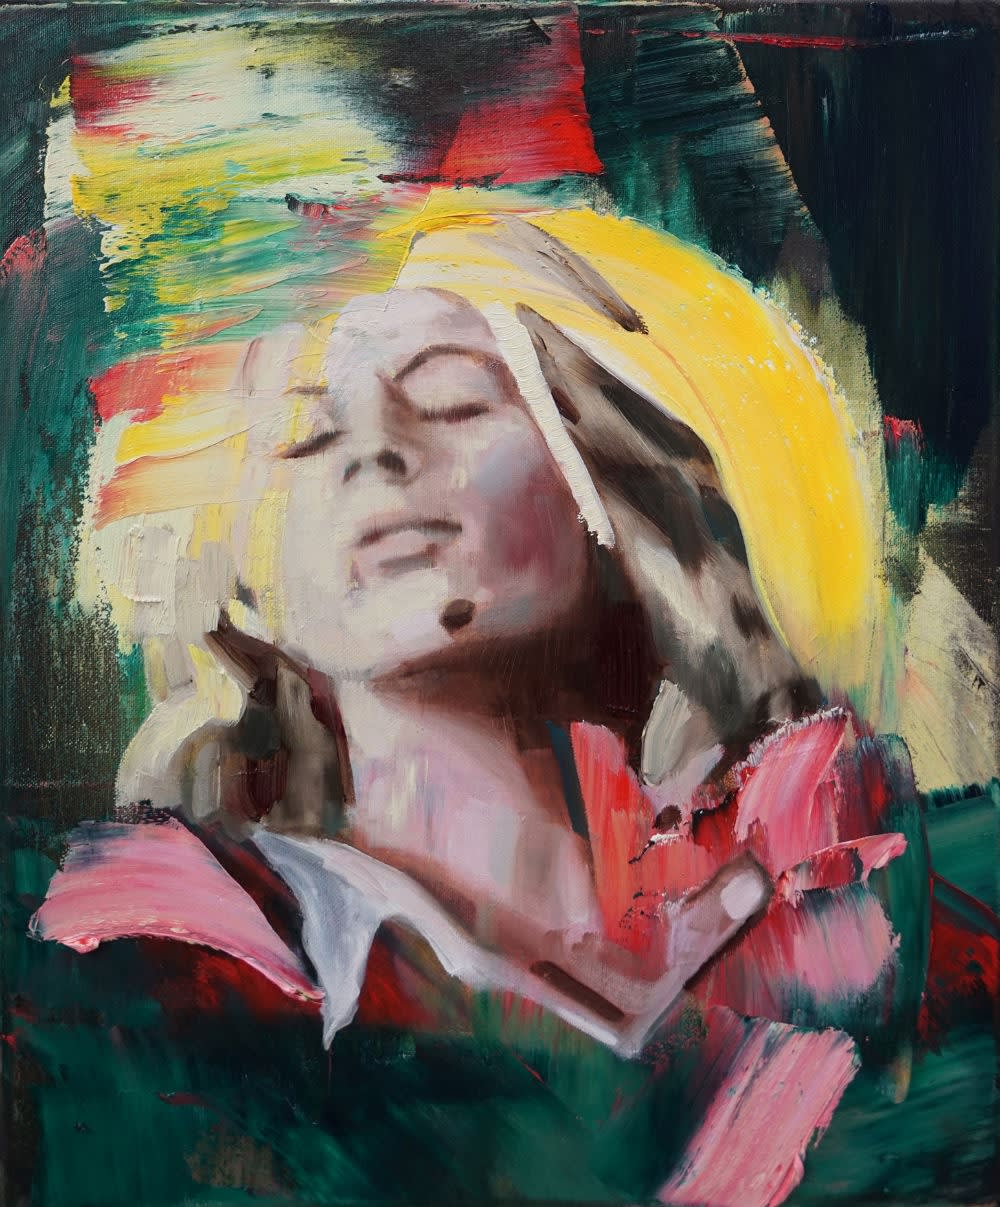 ANNA BITTERSOHL - HELM - 2017 - OIL ON CANVAS - 50 X 40 CM